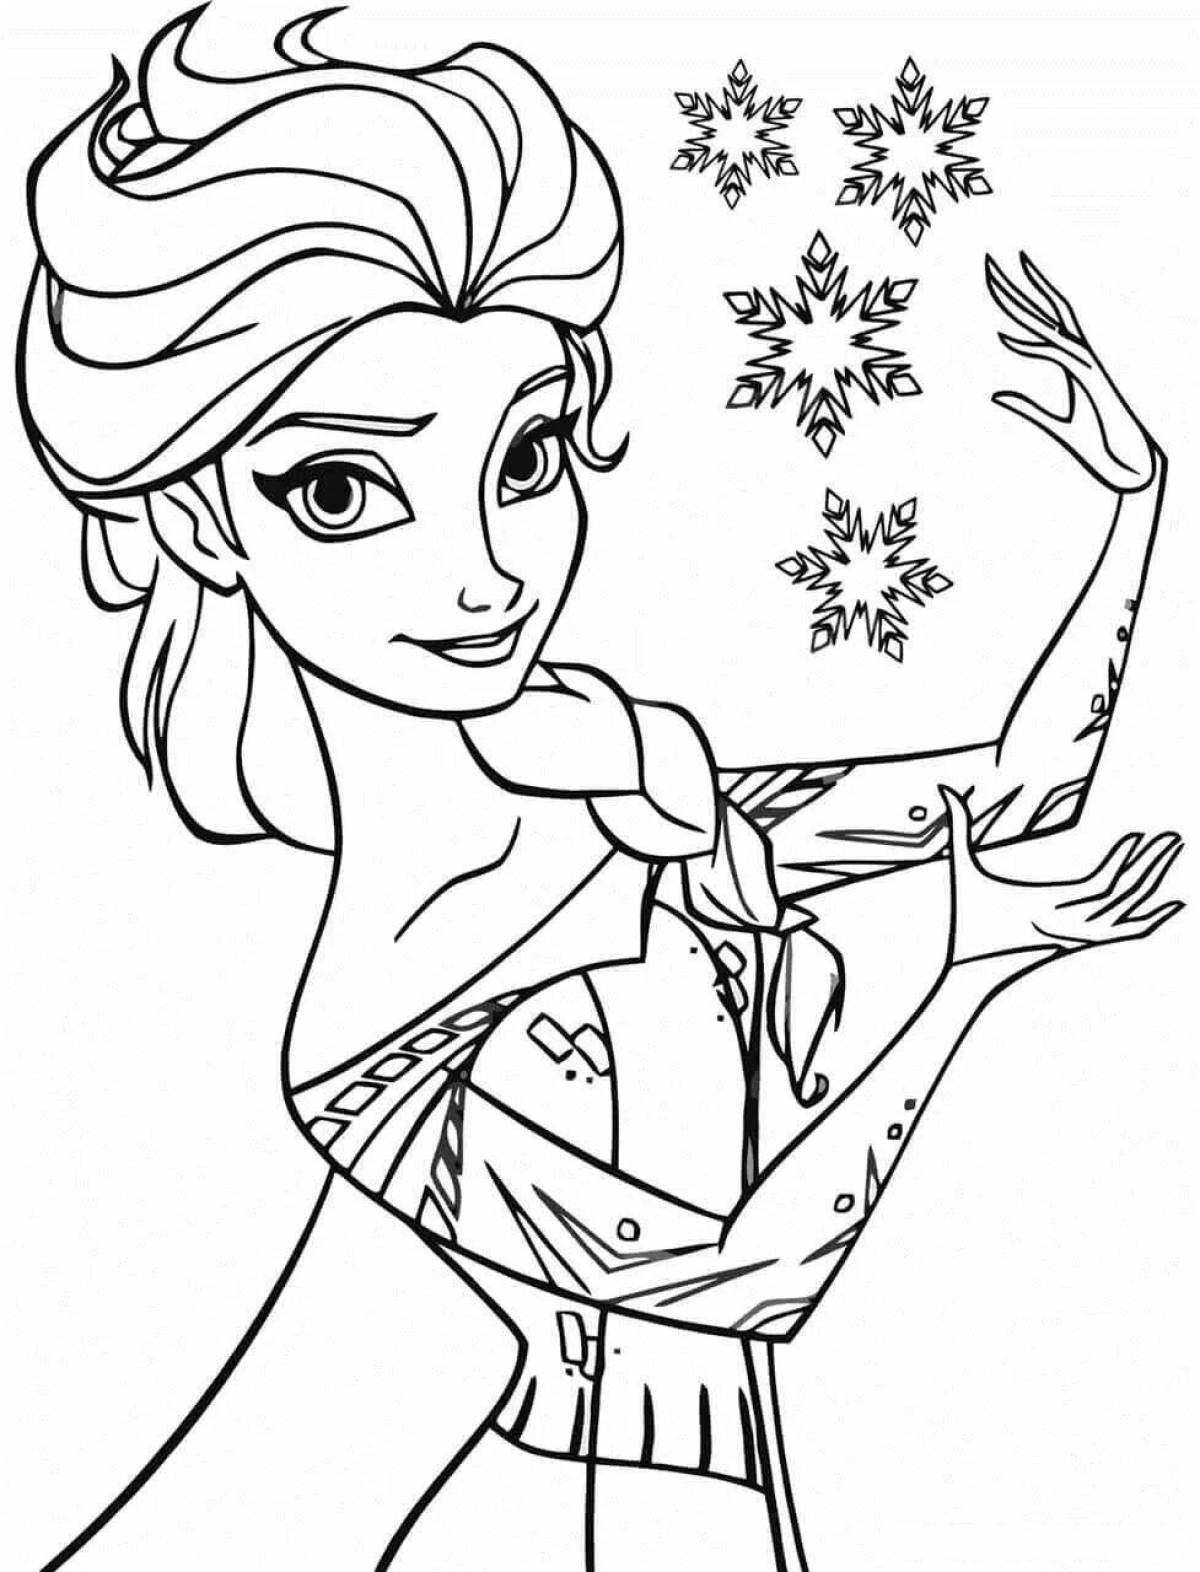 Anna's great coloring book for kids